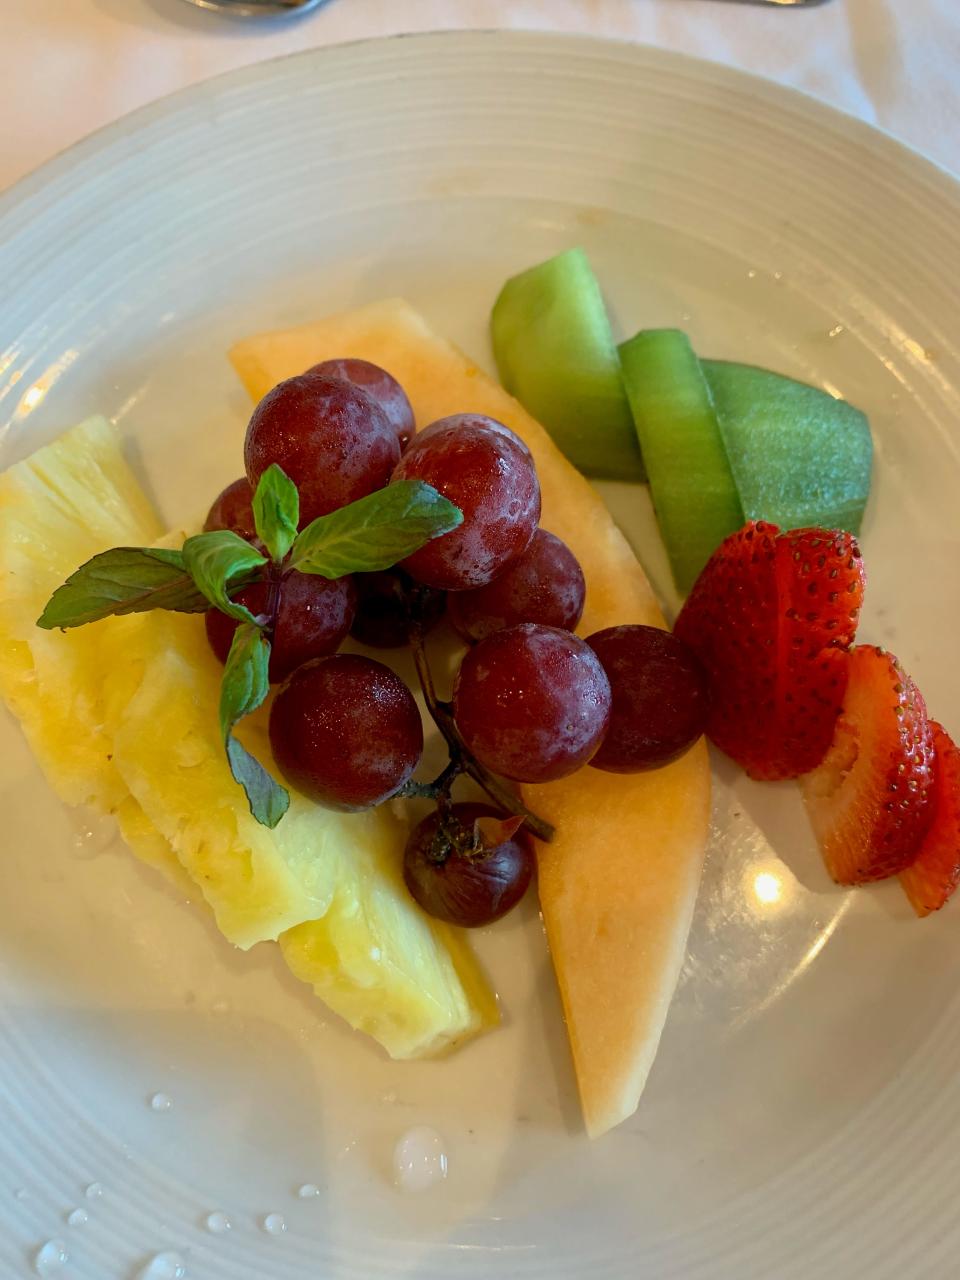 Fruit plate at breakfast on Royal Caribbean's Adventure of the Seas.